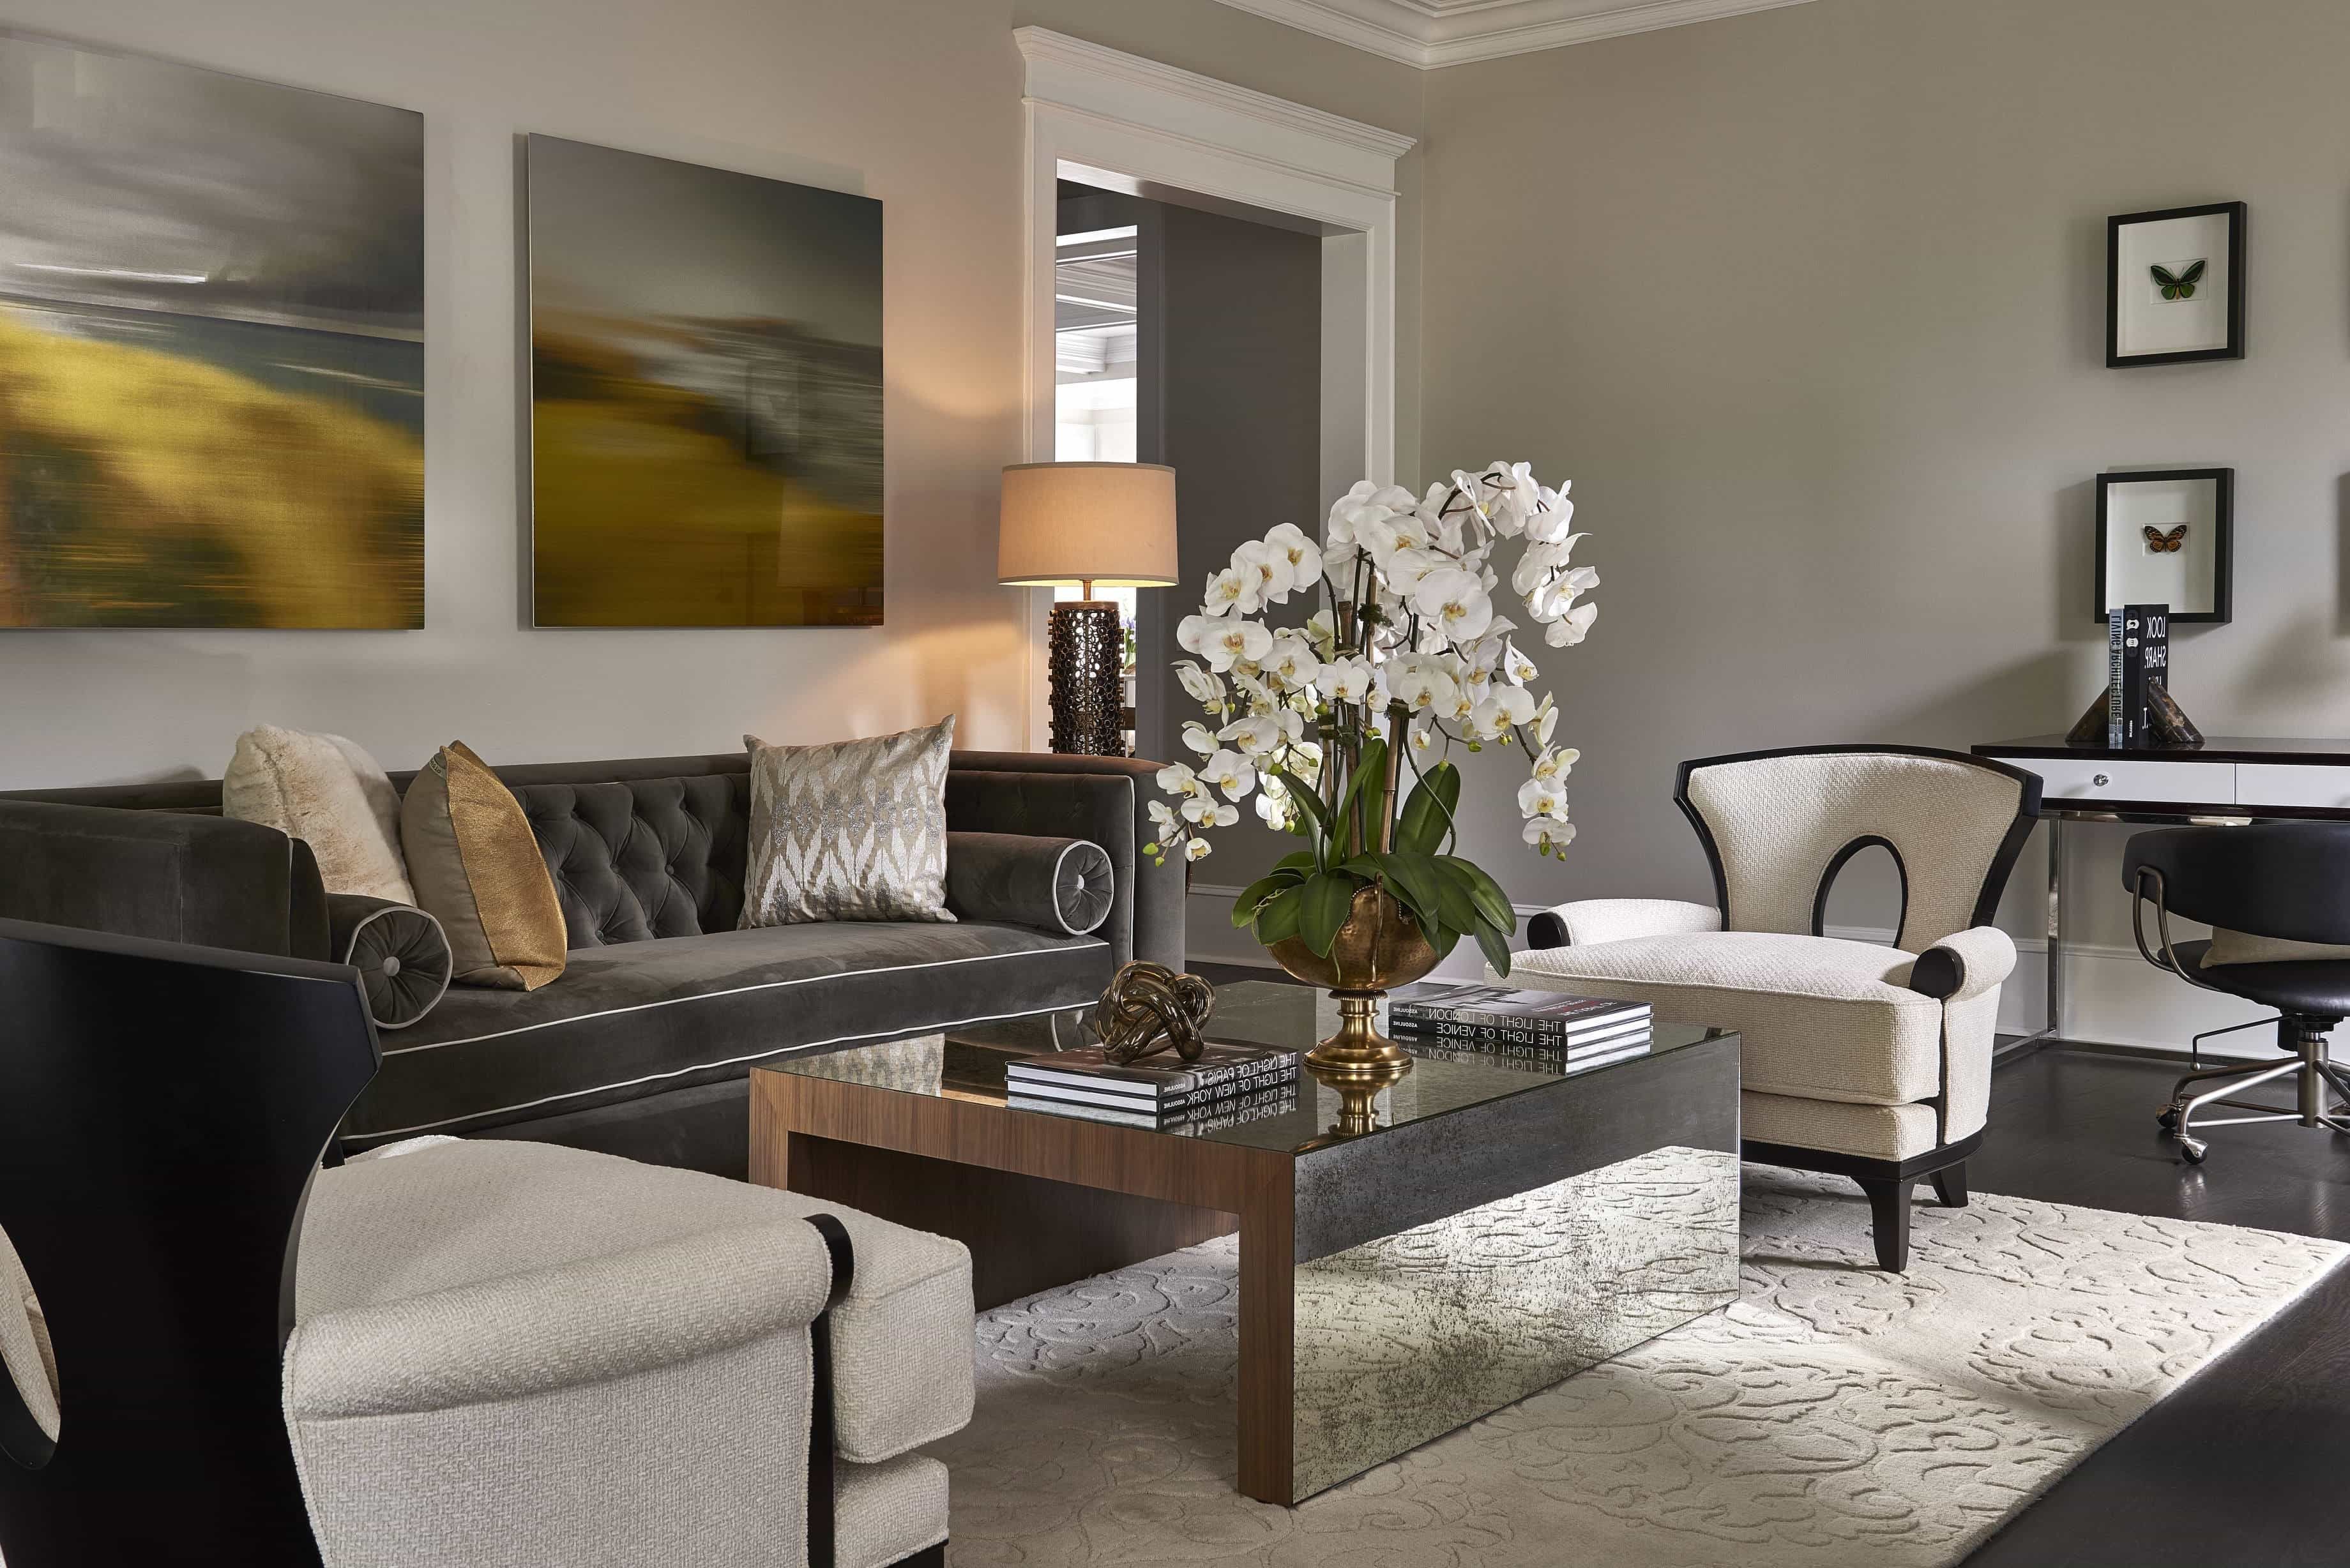 Living Room With Mirrored Coffee Table And Gray Tuxedo Sofa (View 7 of 32)